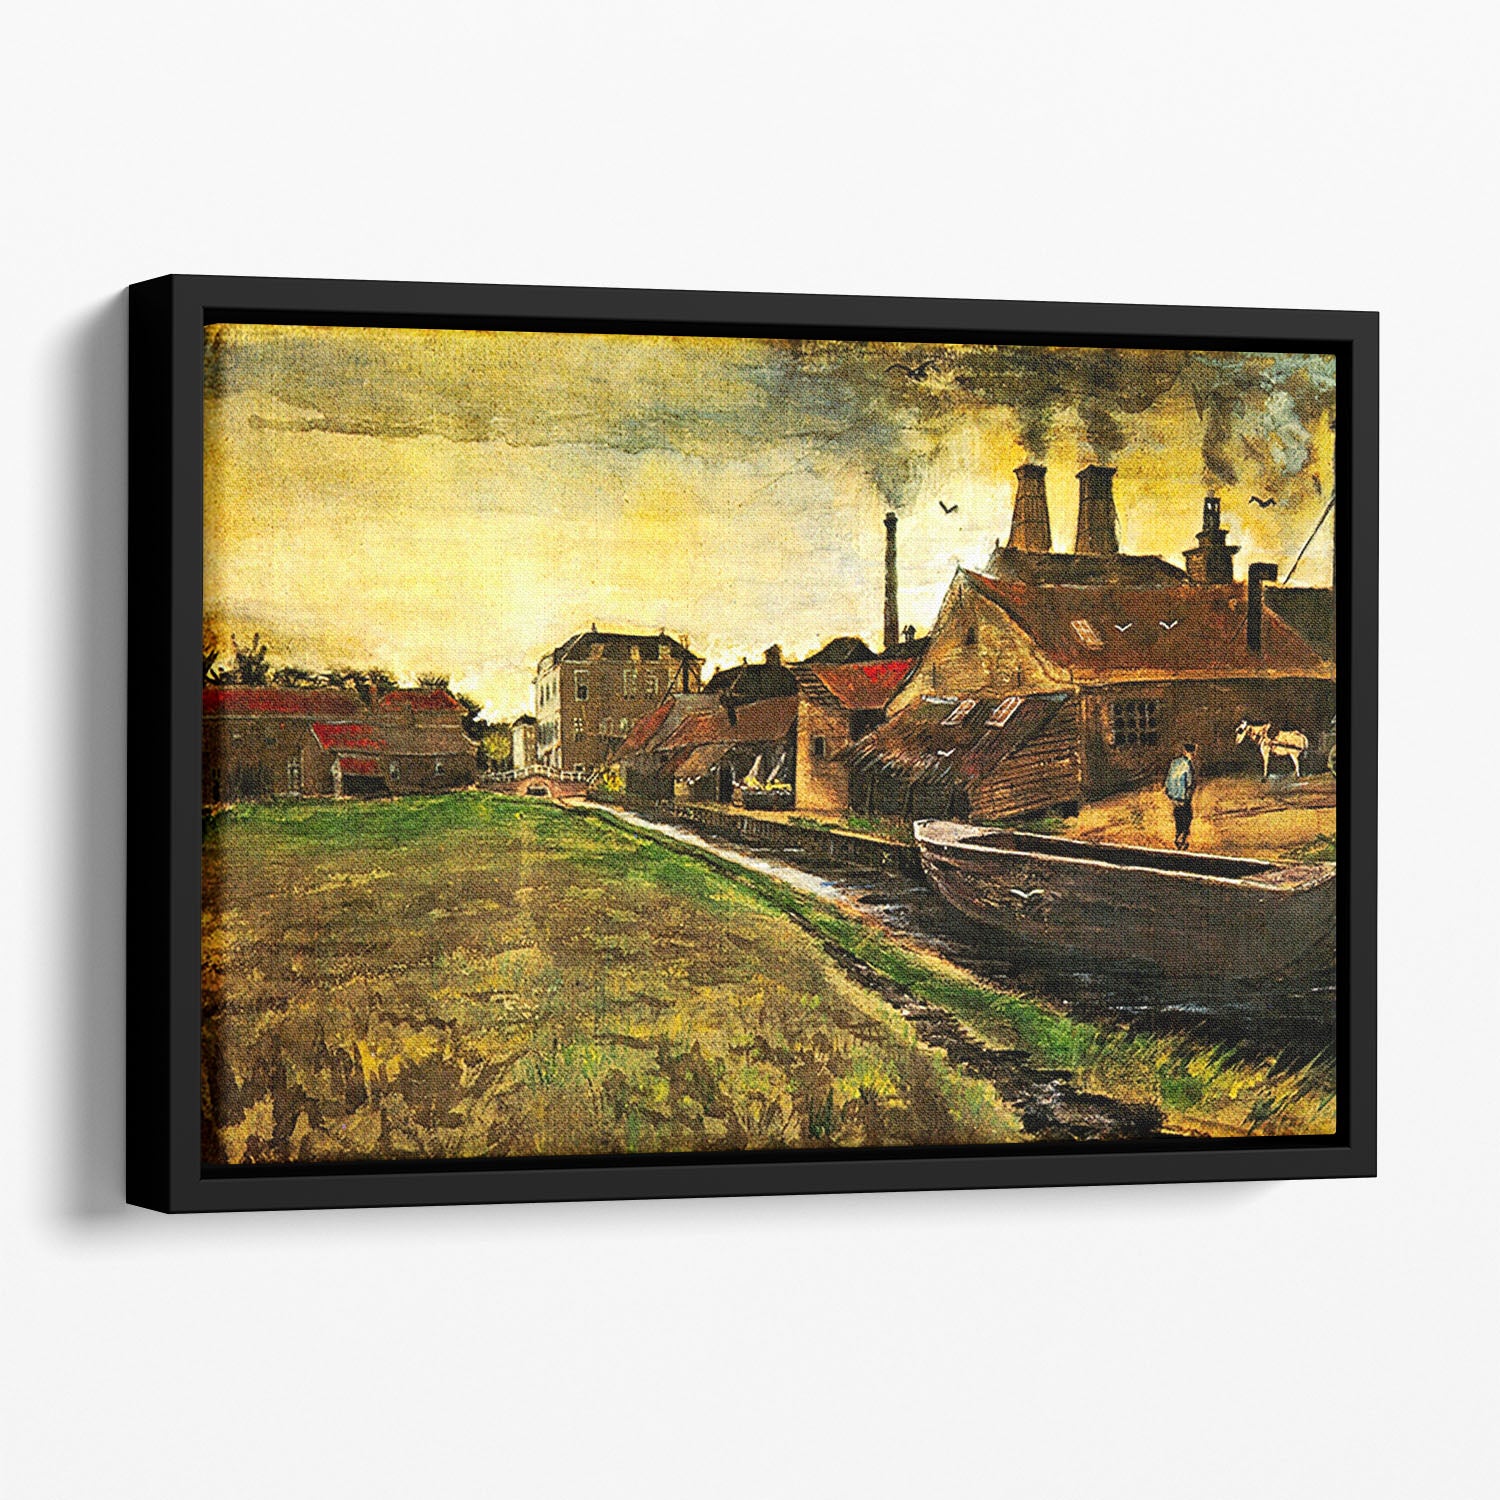 Iron Mill in The Hague by Van Gogh Floating Framed Canvas